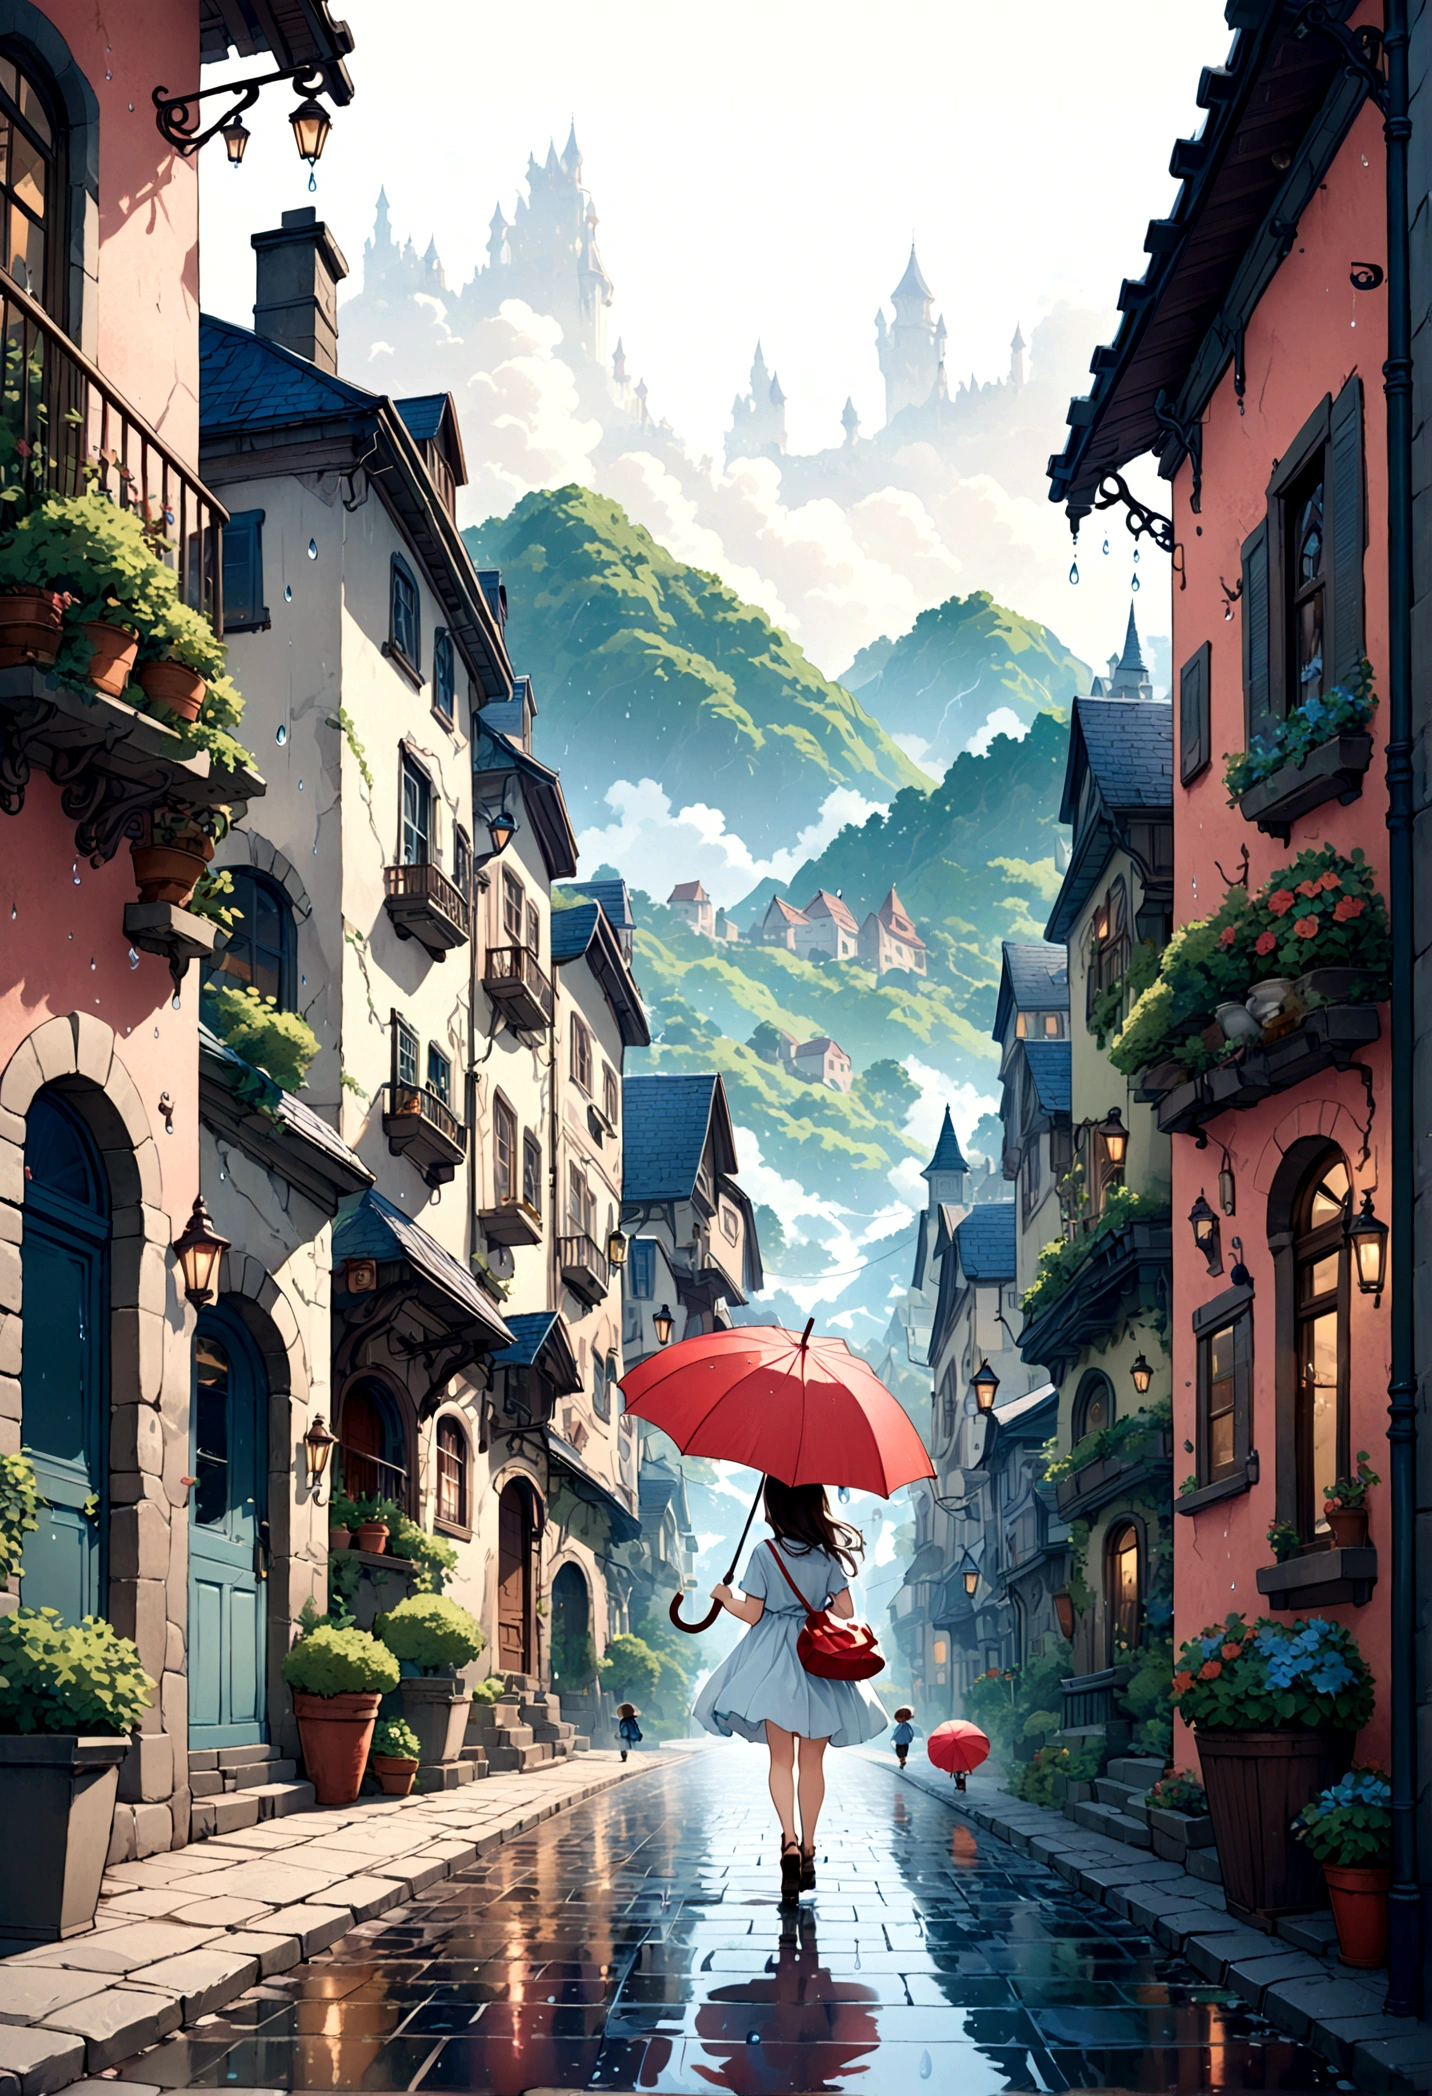 Cute illustration: Landscape,Street corner on a rainy day,A landscape that looks like an illustration from a picture book,Rich in emotion,a girl is walking,BREAK,(Girl with an umbrella),umbrella,anatomically correct,BREAK,create an artistic background,Add a drop pattern to the background,The streets are fancy, like a fairy tale,This is a cute illustration like a dream.,Please blur the lines of the droplet pattern to create an artistic expression.,Intricate details,Wide range of colors,artwork,rendering,(masterpiece:1.3),(highest quality:1.4),(Super detailed:1.5),High resolution,Very detailed,unity 8k wallpaper,structurally correct,cute